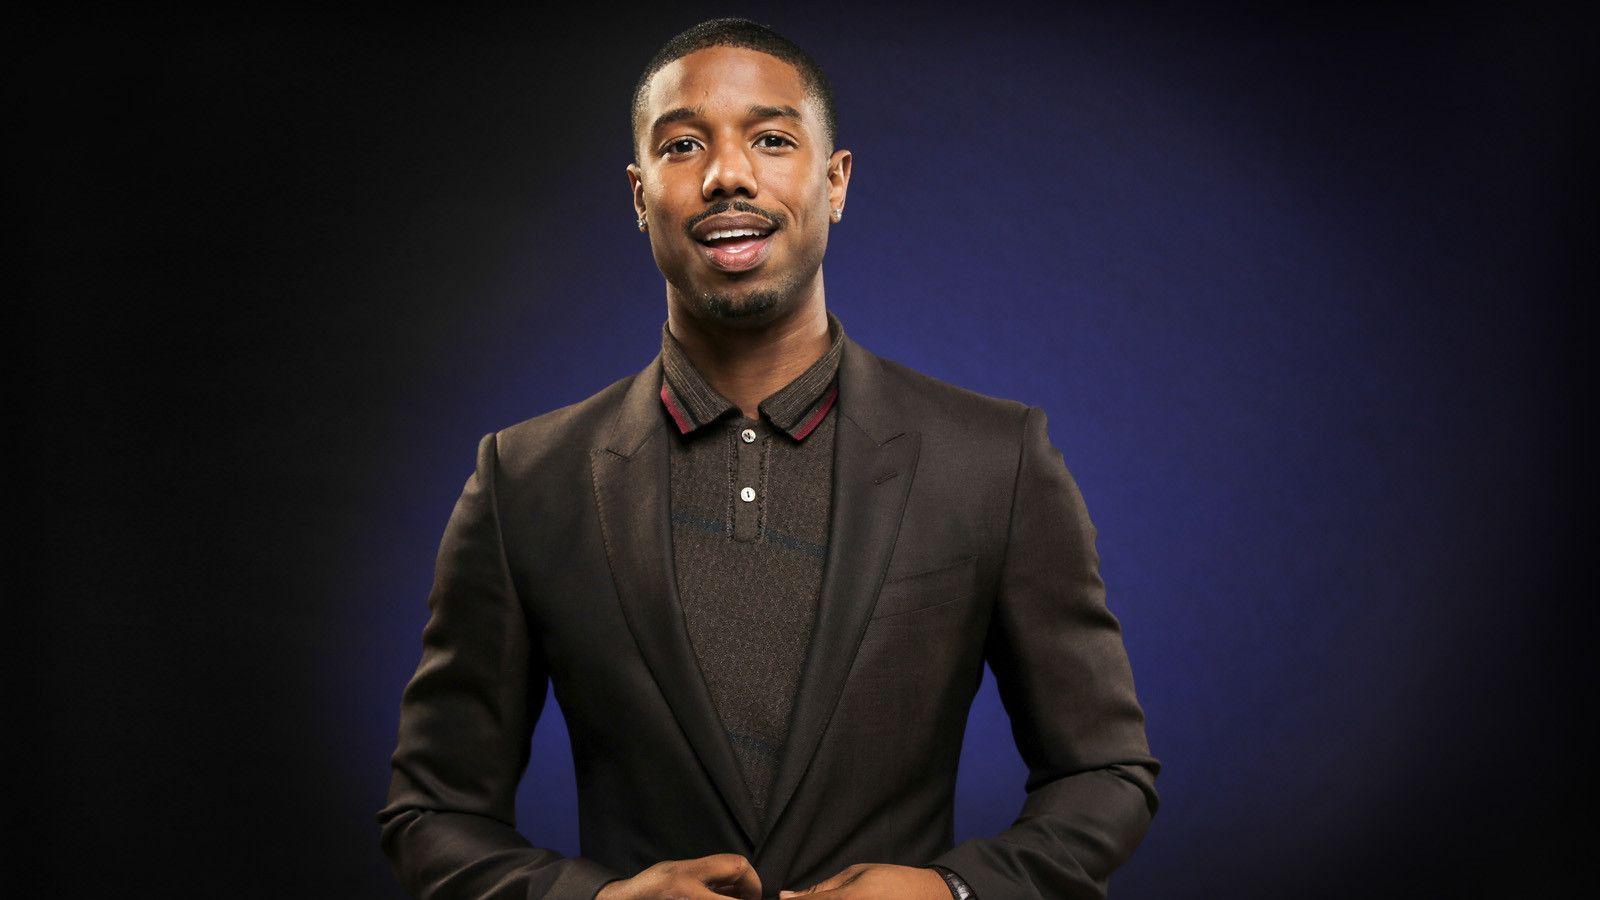 Video chat: Michael B. Jordan wants to talk to you about 'Creed